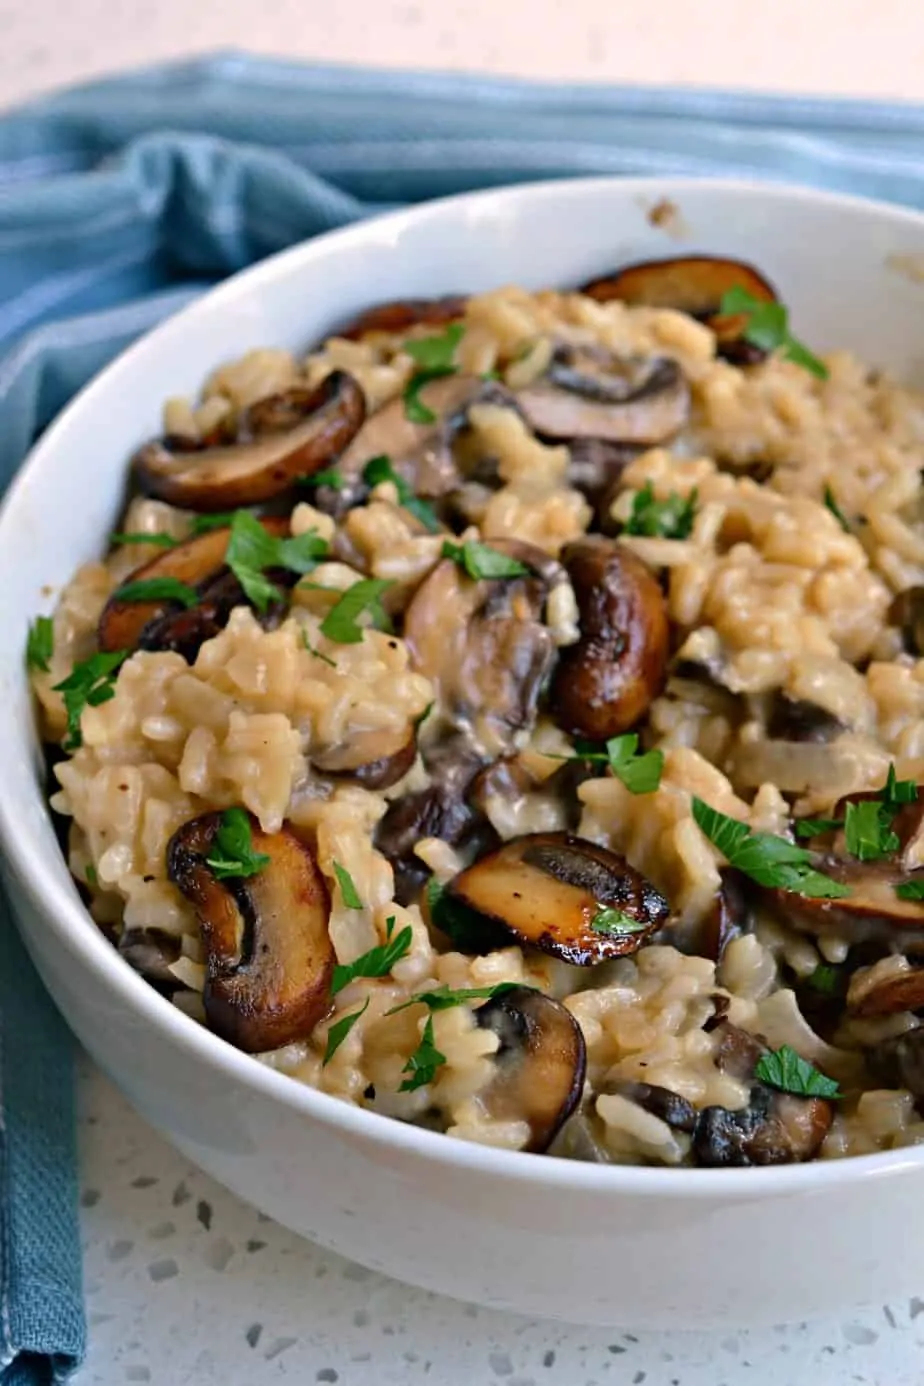 Cook this creamy and luscious Mushroom Risotto made just a like a five star restaurant.